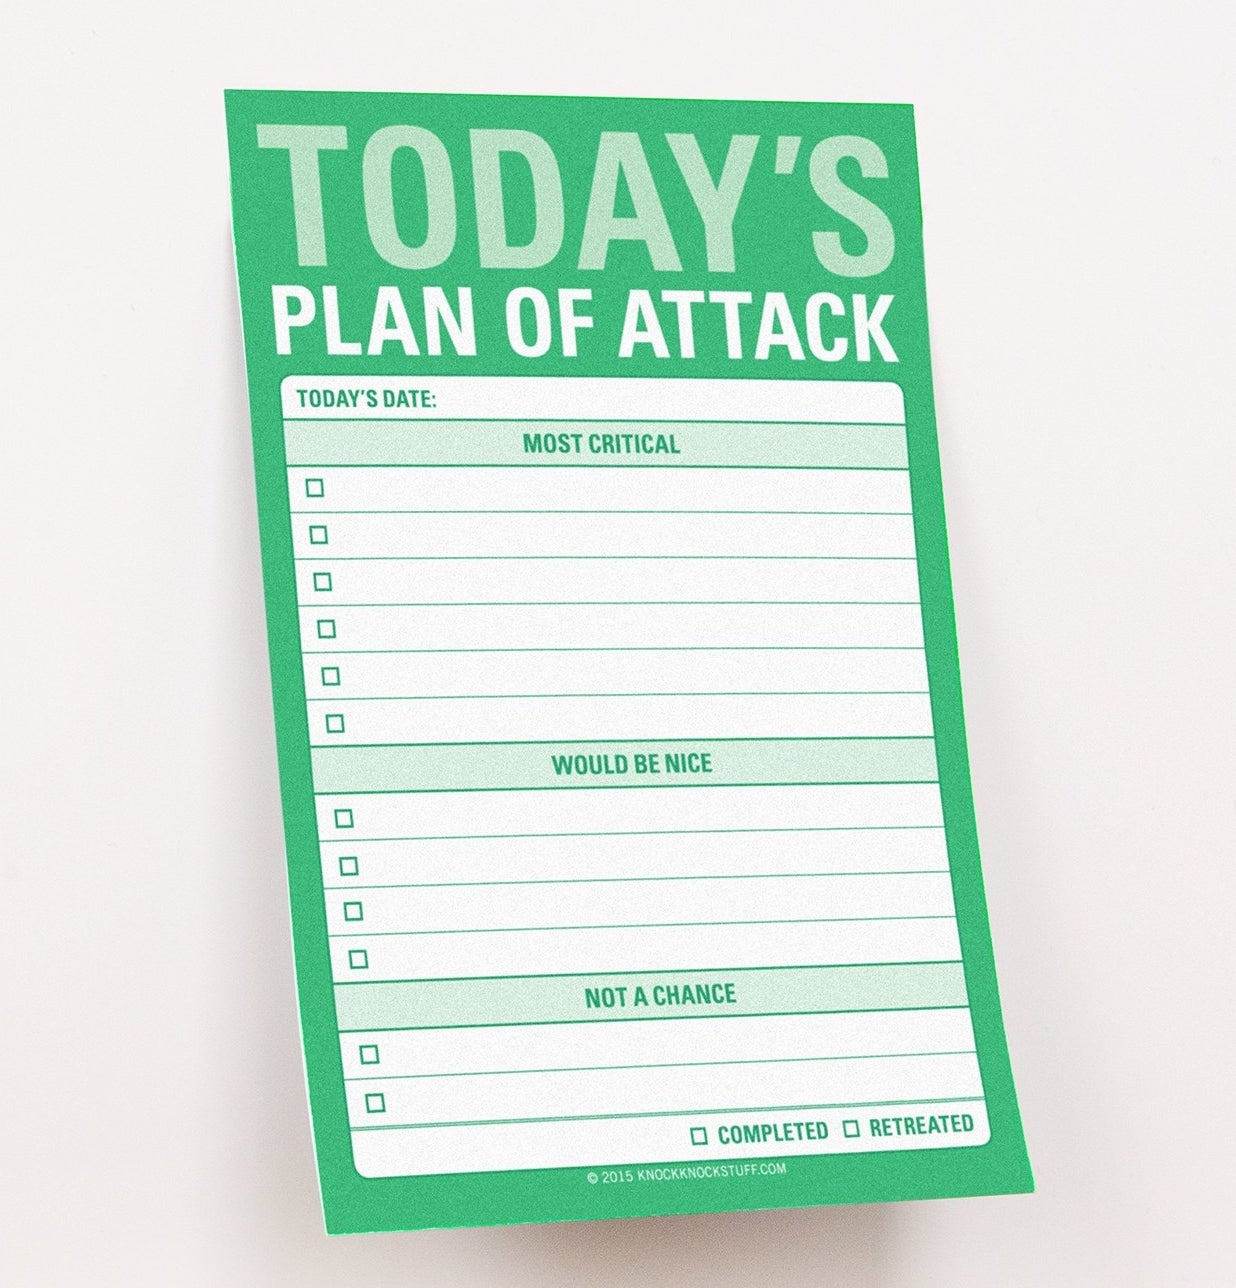 One of the stickies, which reads &quot;Today&#x27;s plan of attack&quot; and has space for the date and lined checklist sections labeled &quot;Most critical,&quot; &quot;Would be nice,&quot; and &quot;Not a chance&quot; 